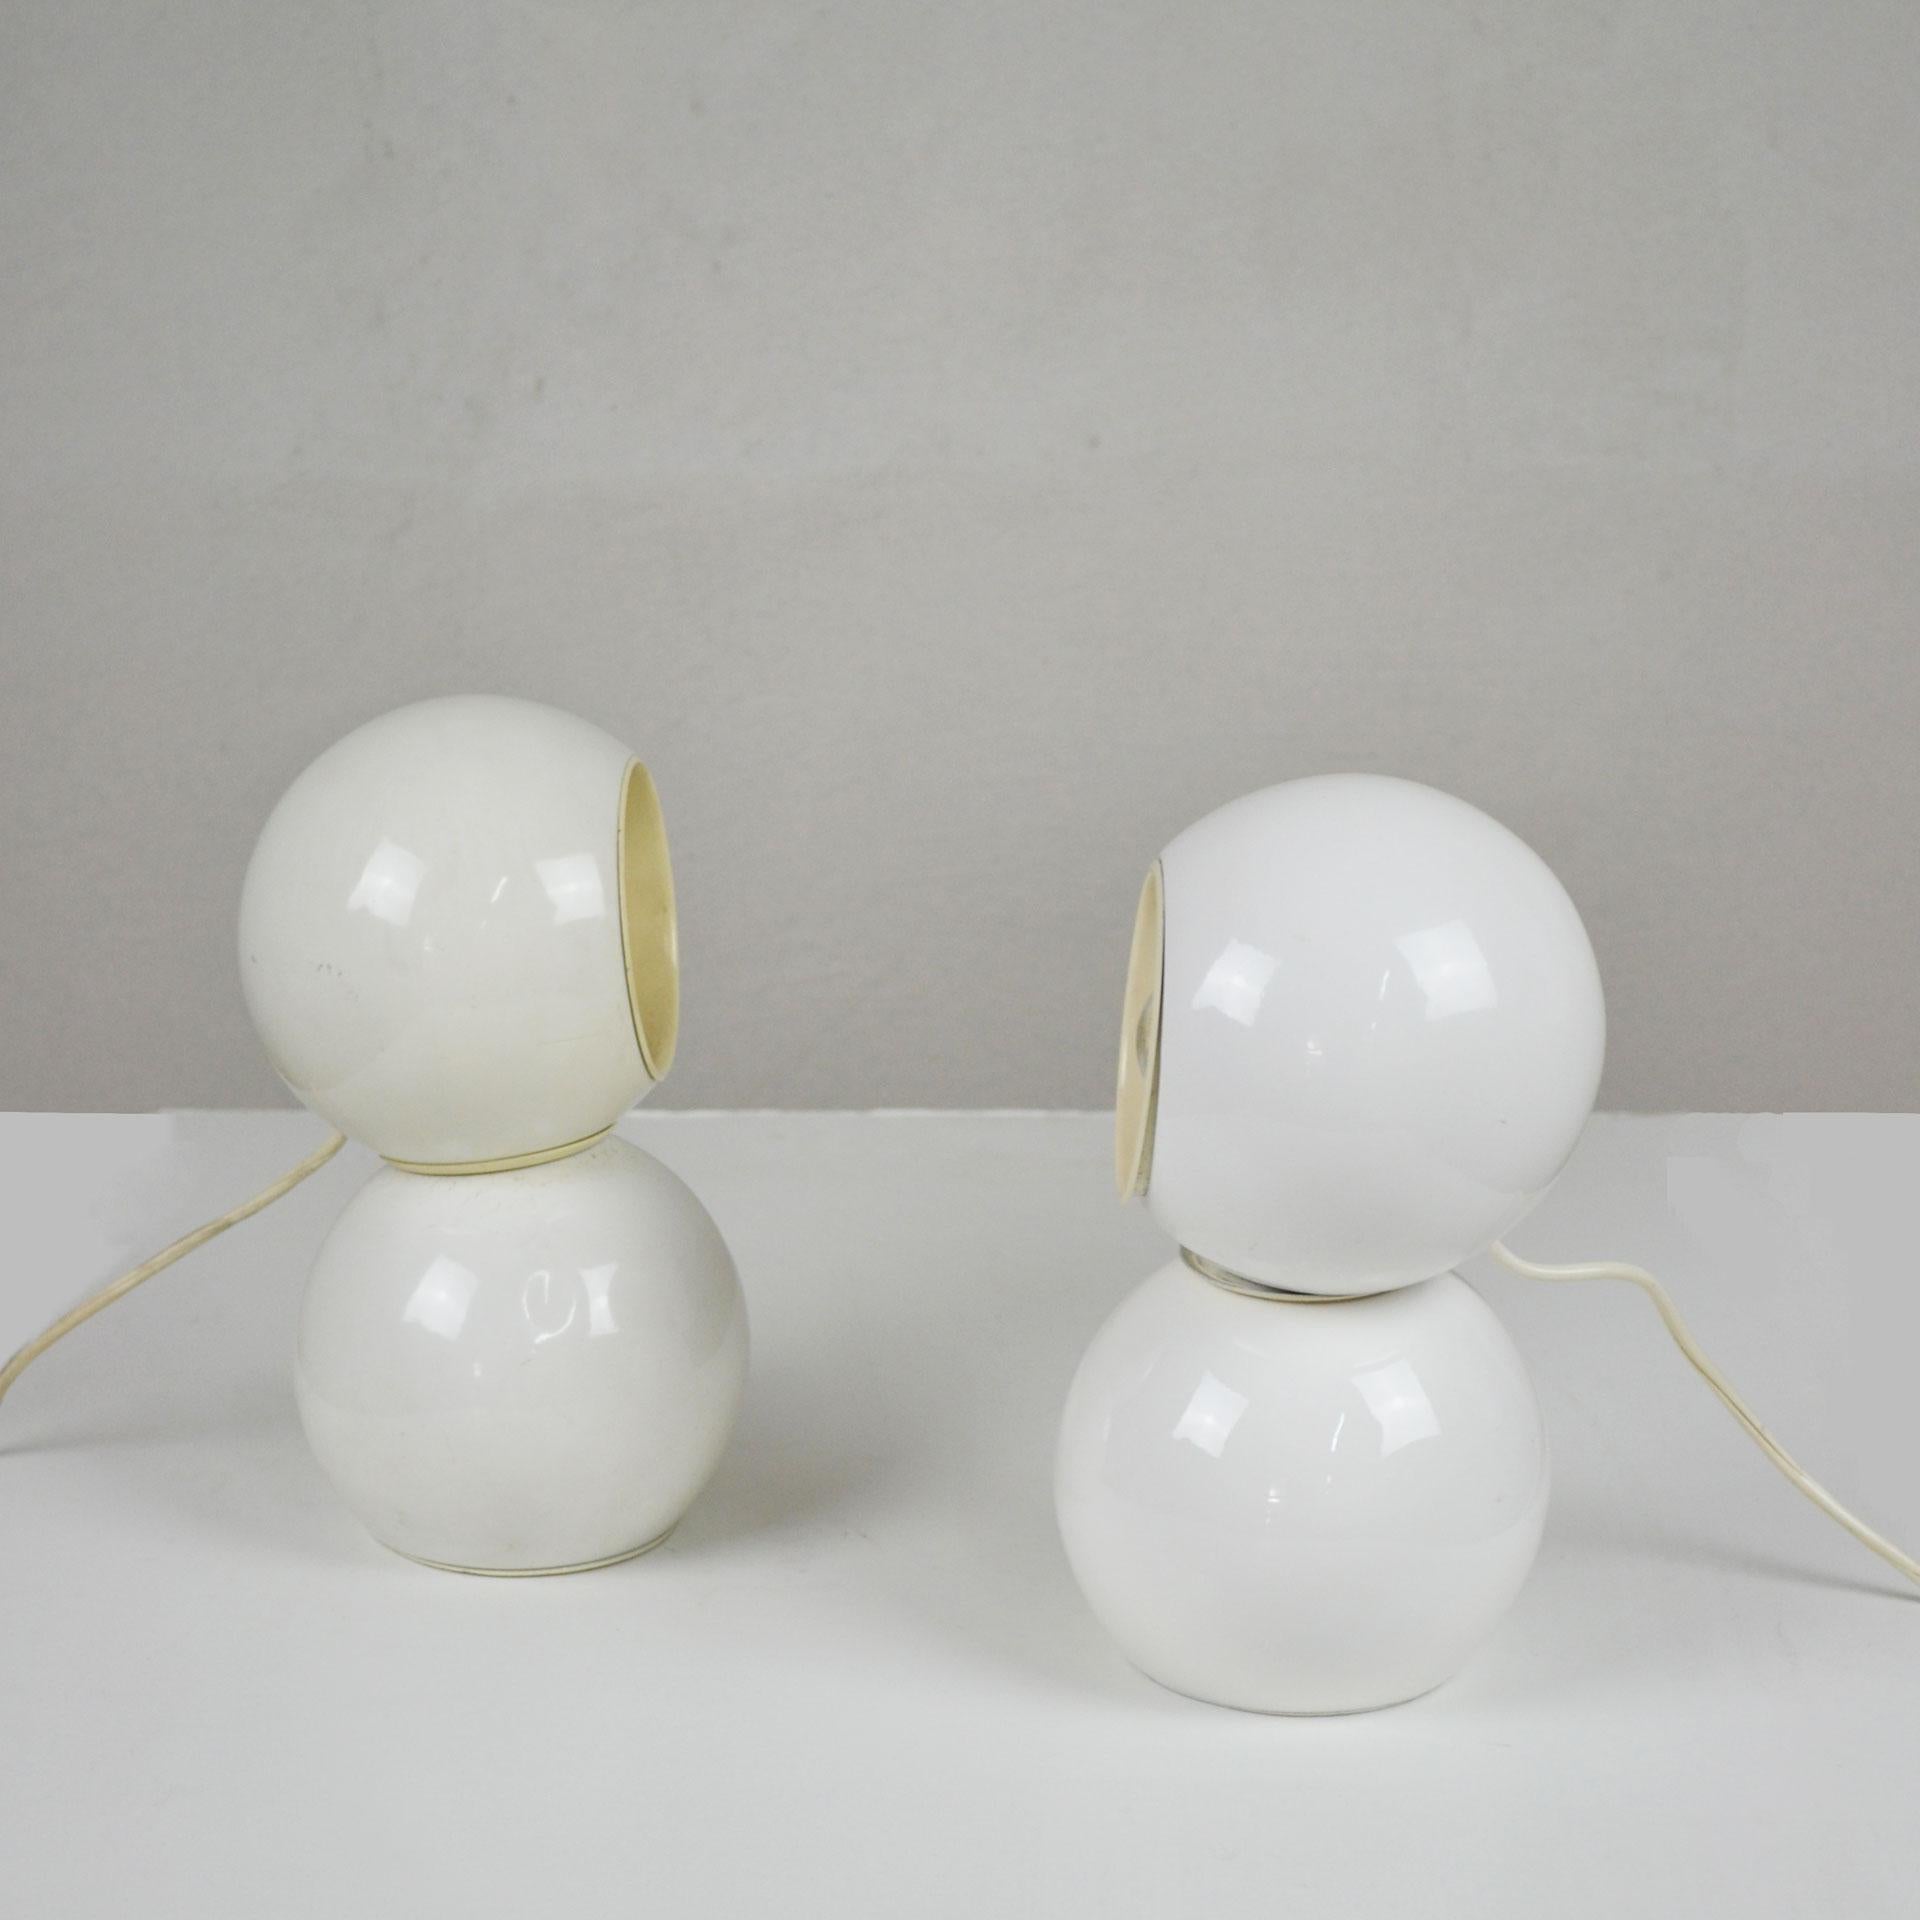 Pair of table lamps model 541 designed in late '60s by Antonio Macchi Cassia for Arteluce.
Each lamp consists of two parts that remain integral thanks to magnets, which allow you to orient the sphere with the bulb at will.
Both lamps have the